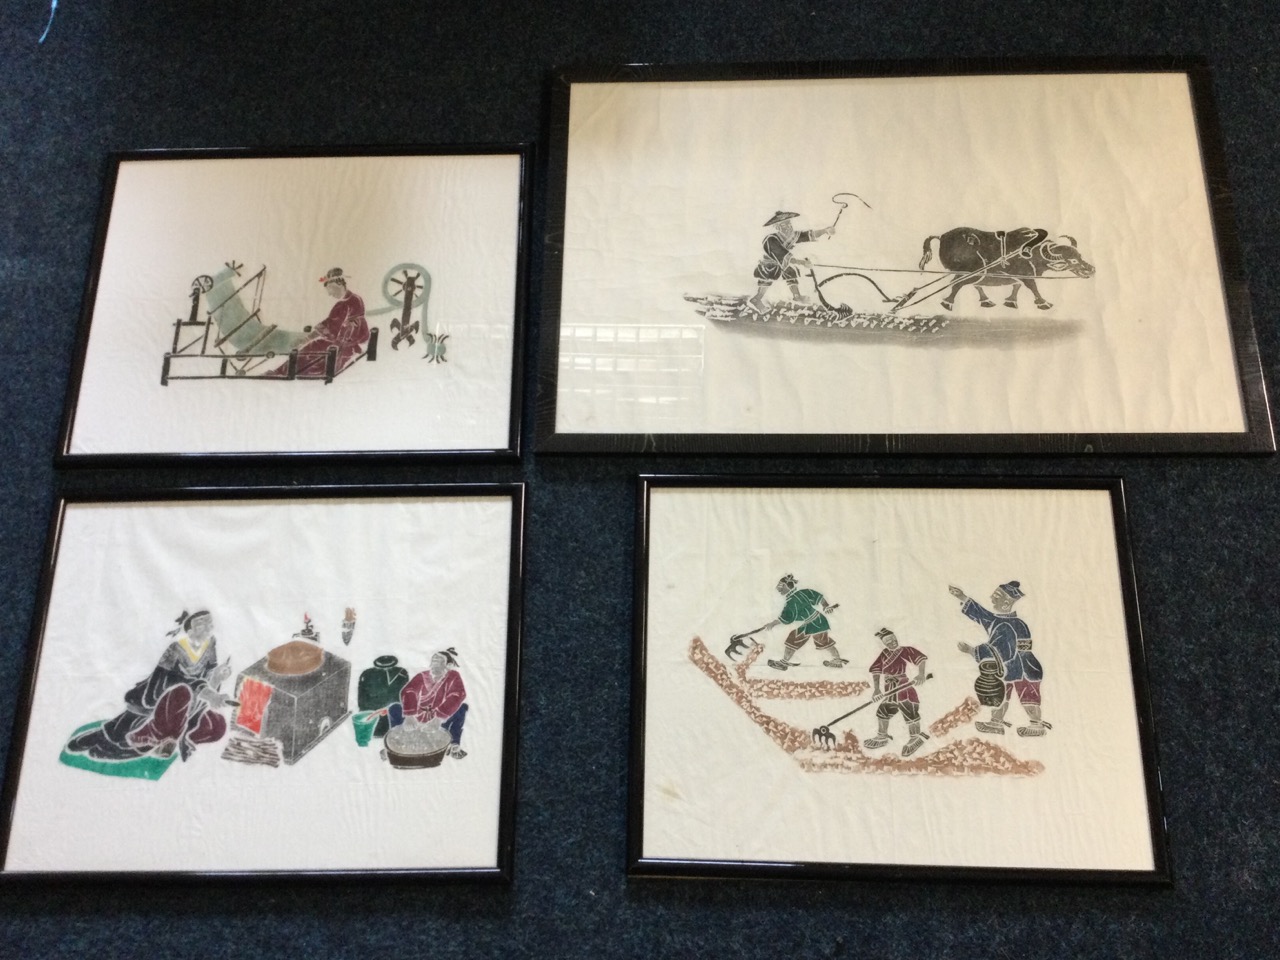 Chinese school, four traditional print rubbings on paper - monochrome of ploughing oxen, and three